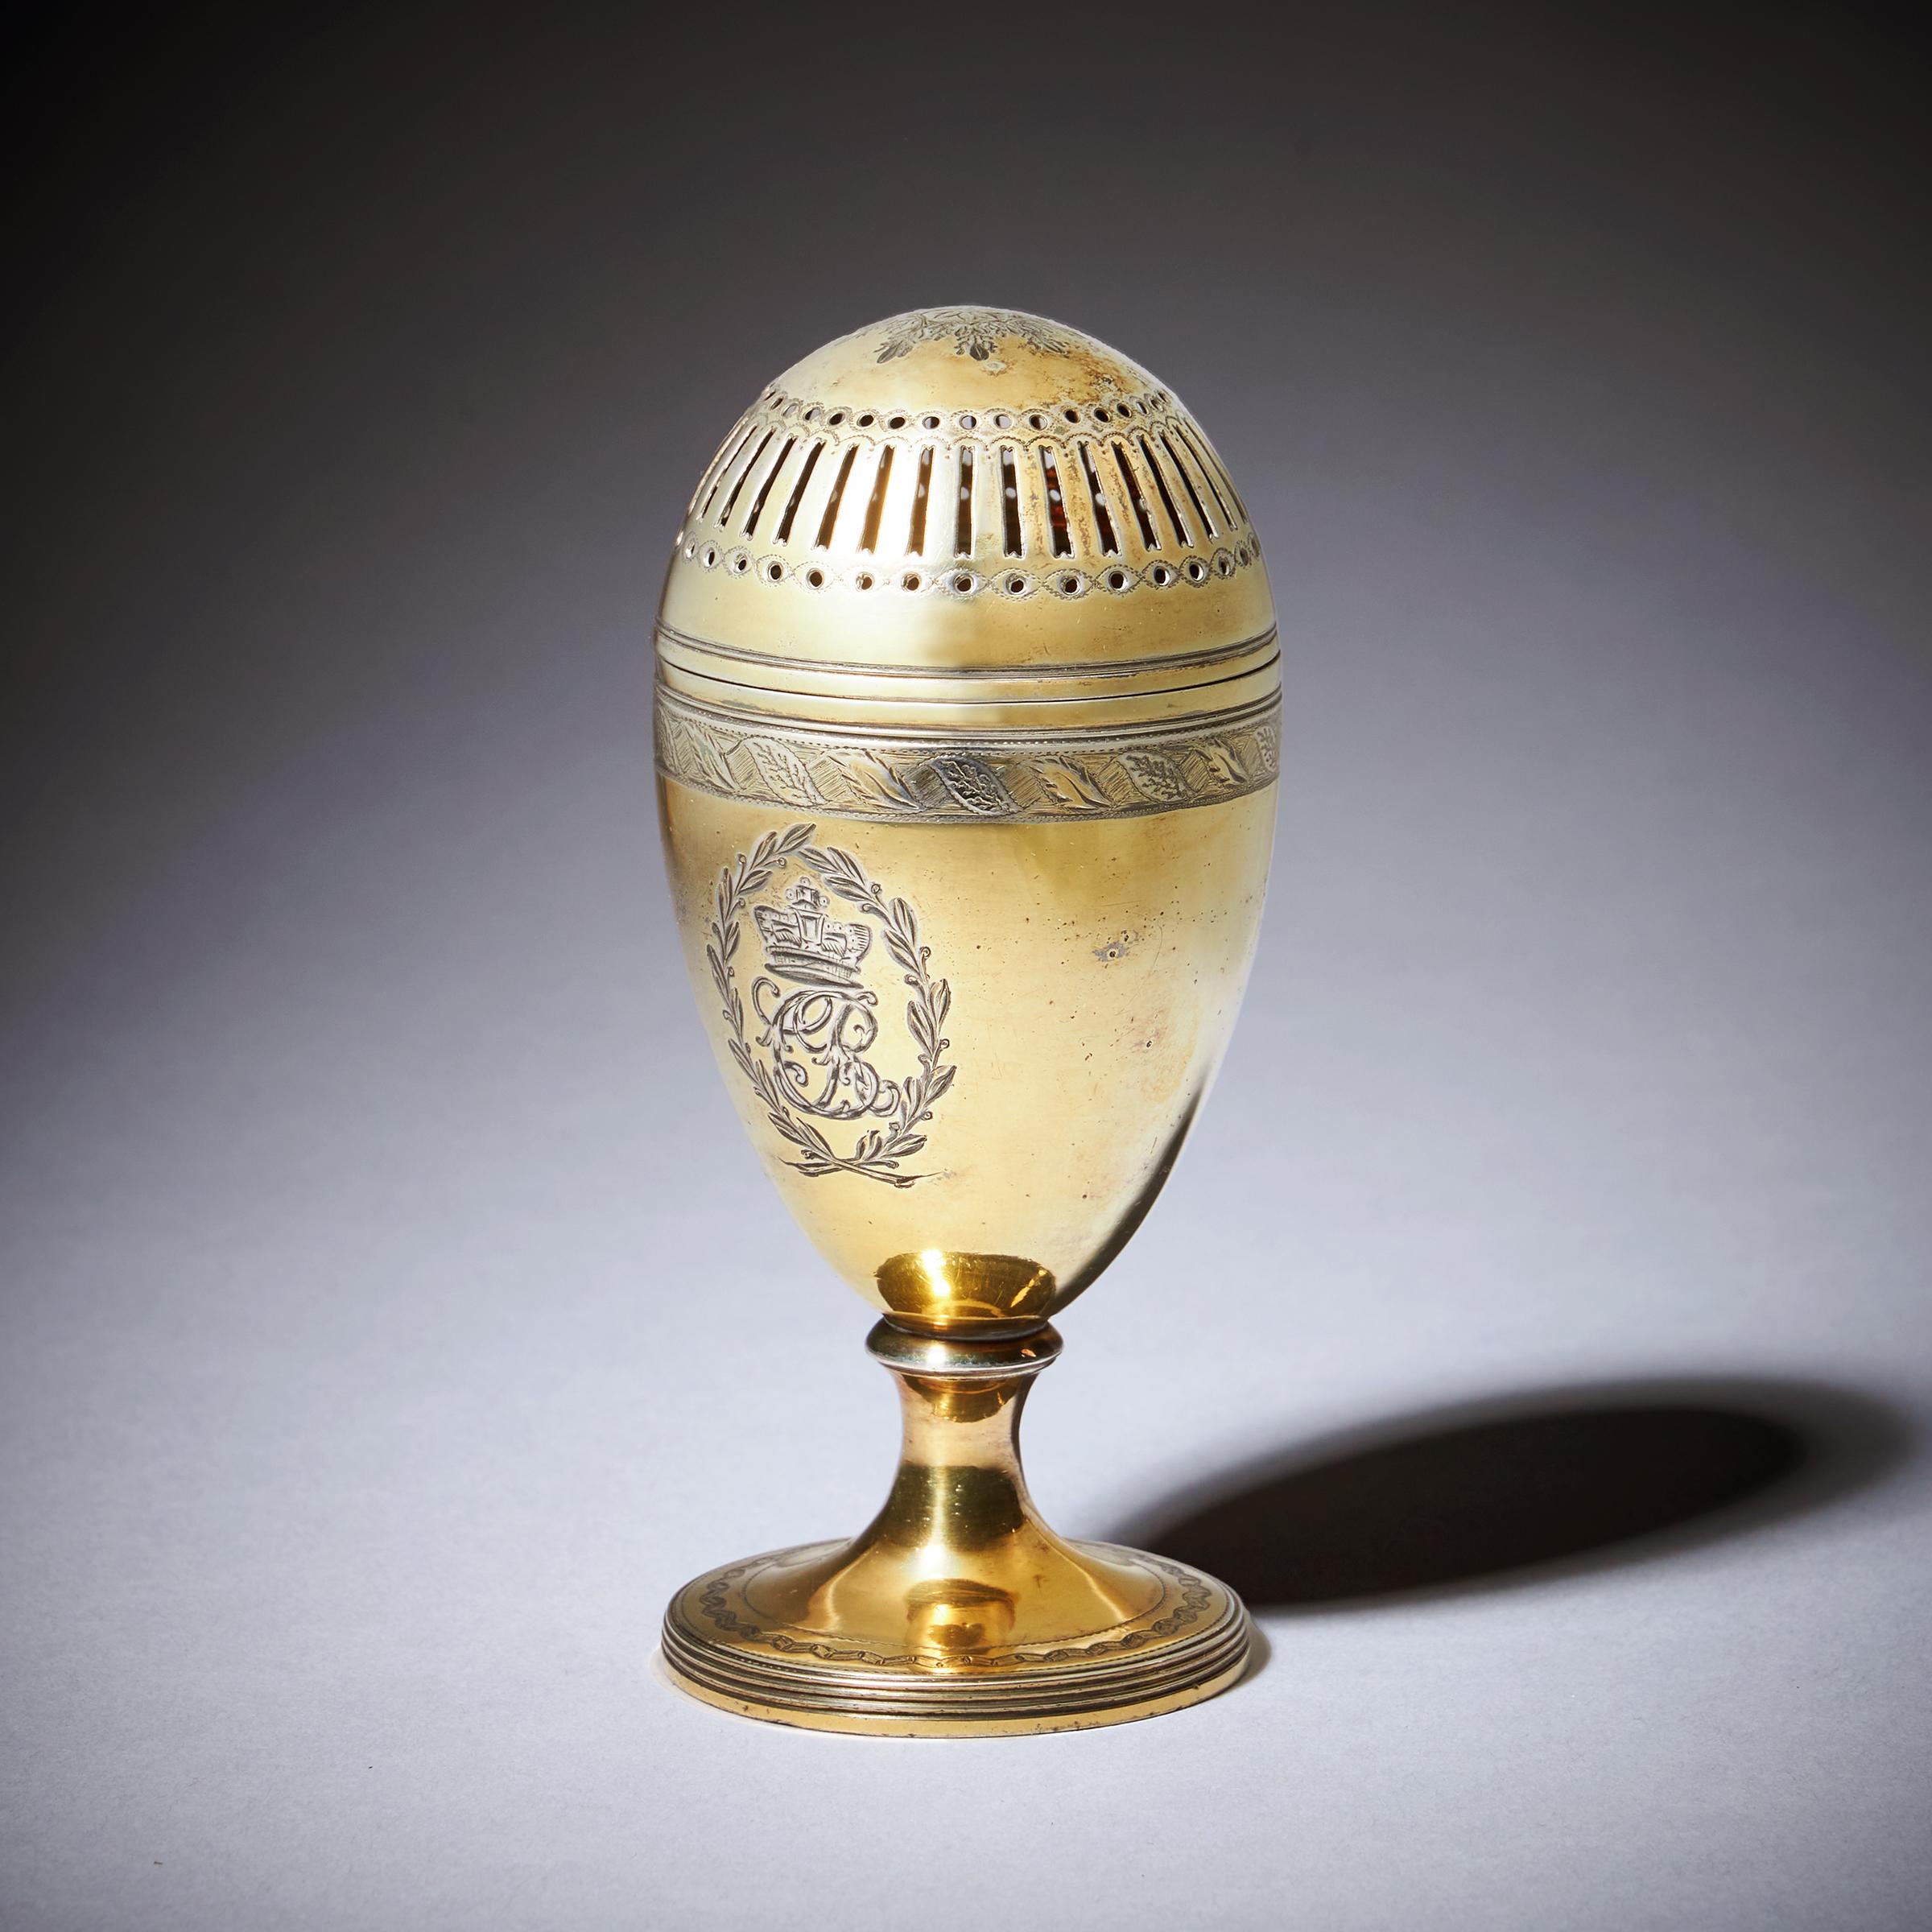 British George III Silver-Gilt Pepper Pot with the Royal Cypher of Queen Charlotte, 1798